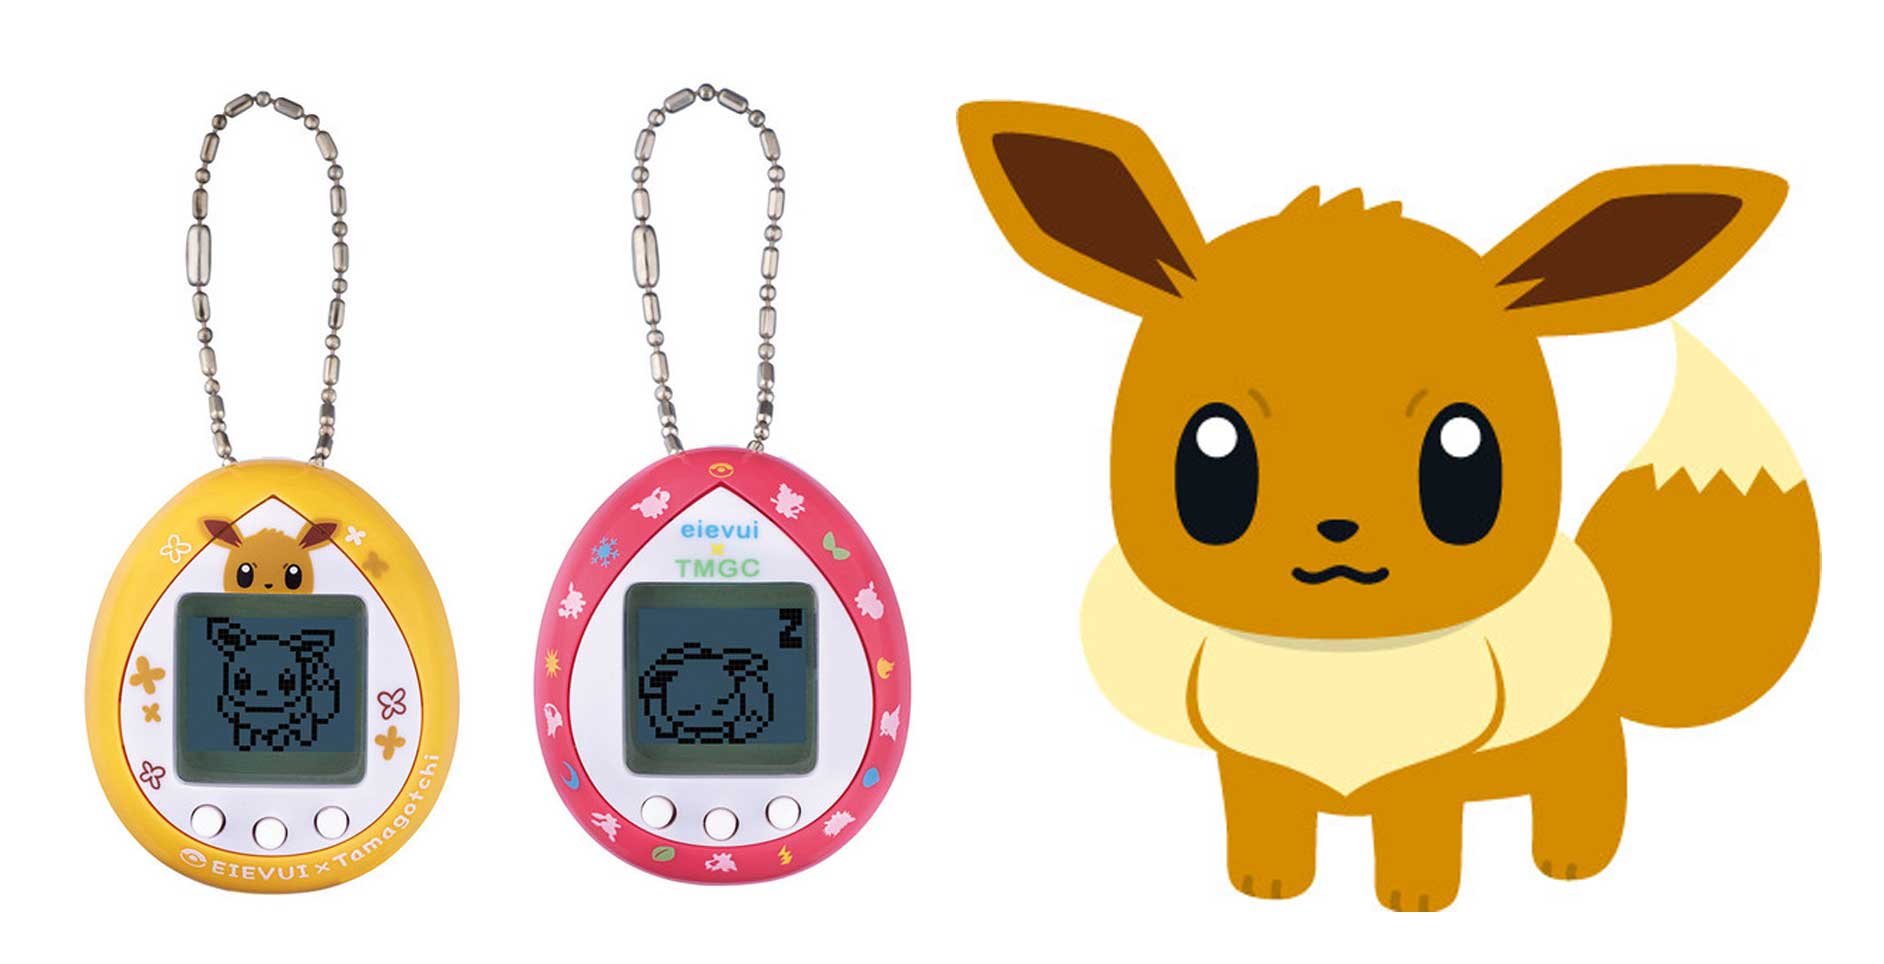 lette Garderobe Opiate The Eevee Tamagotchi Is Officially Coming With Your Favourite Eeveelutions